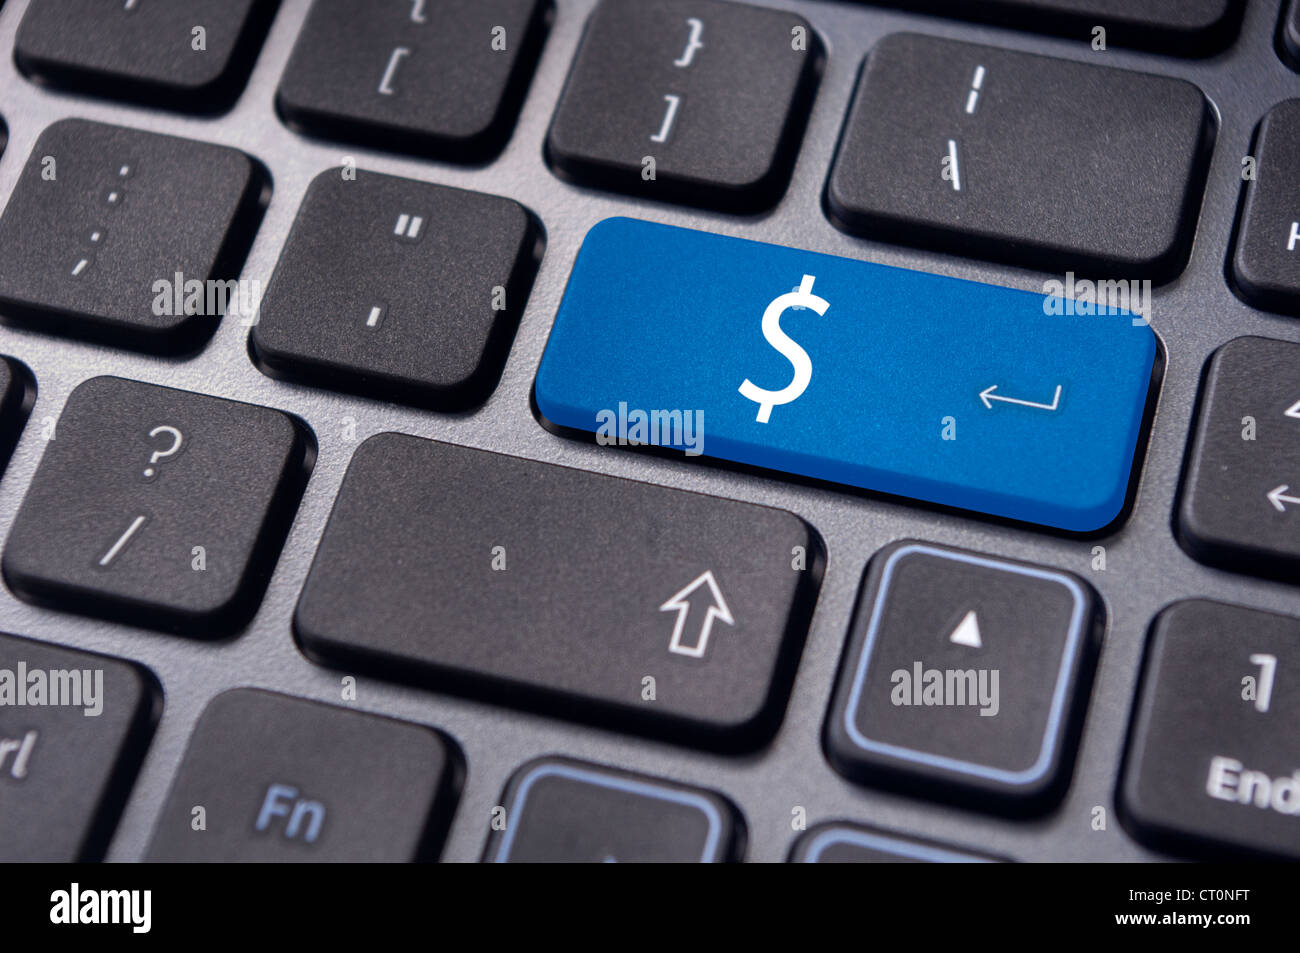 US dollar or money sign on enter key of keyboard, for conceptual usage. Stock Photo